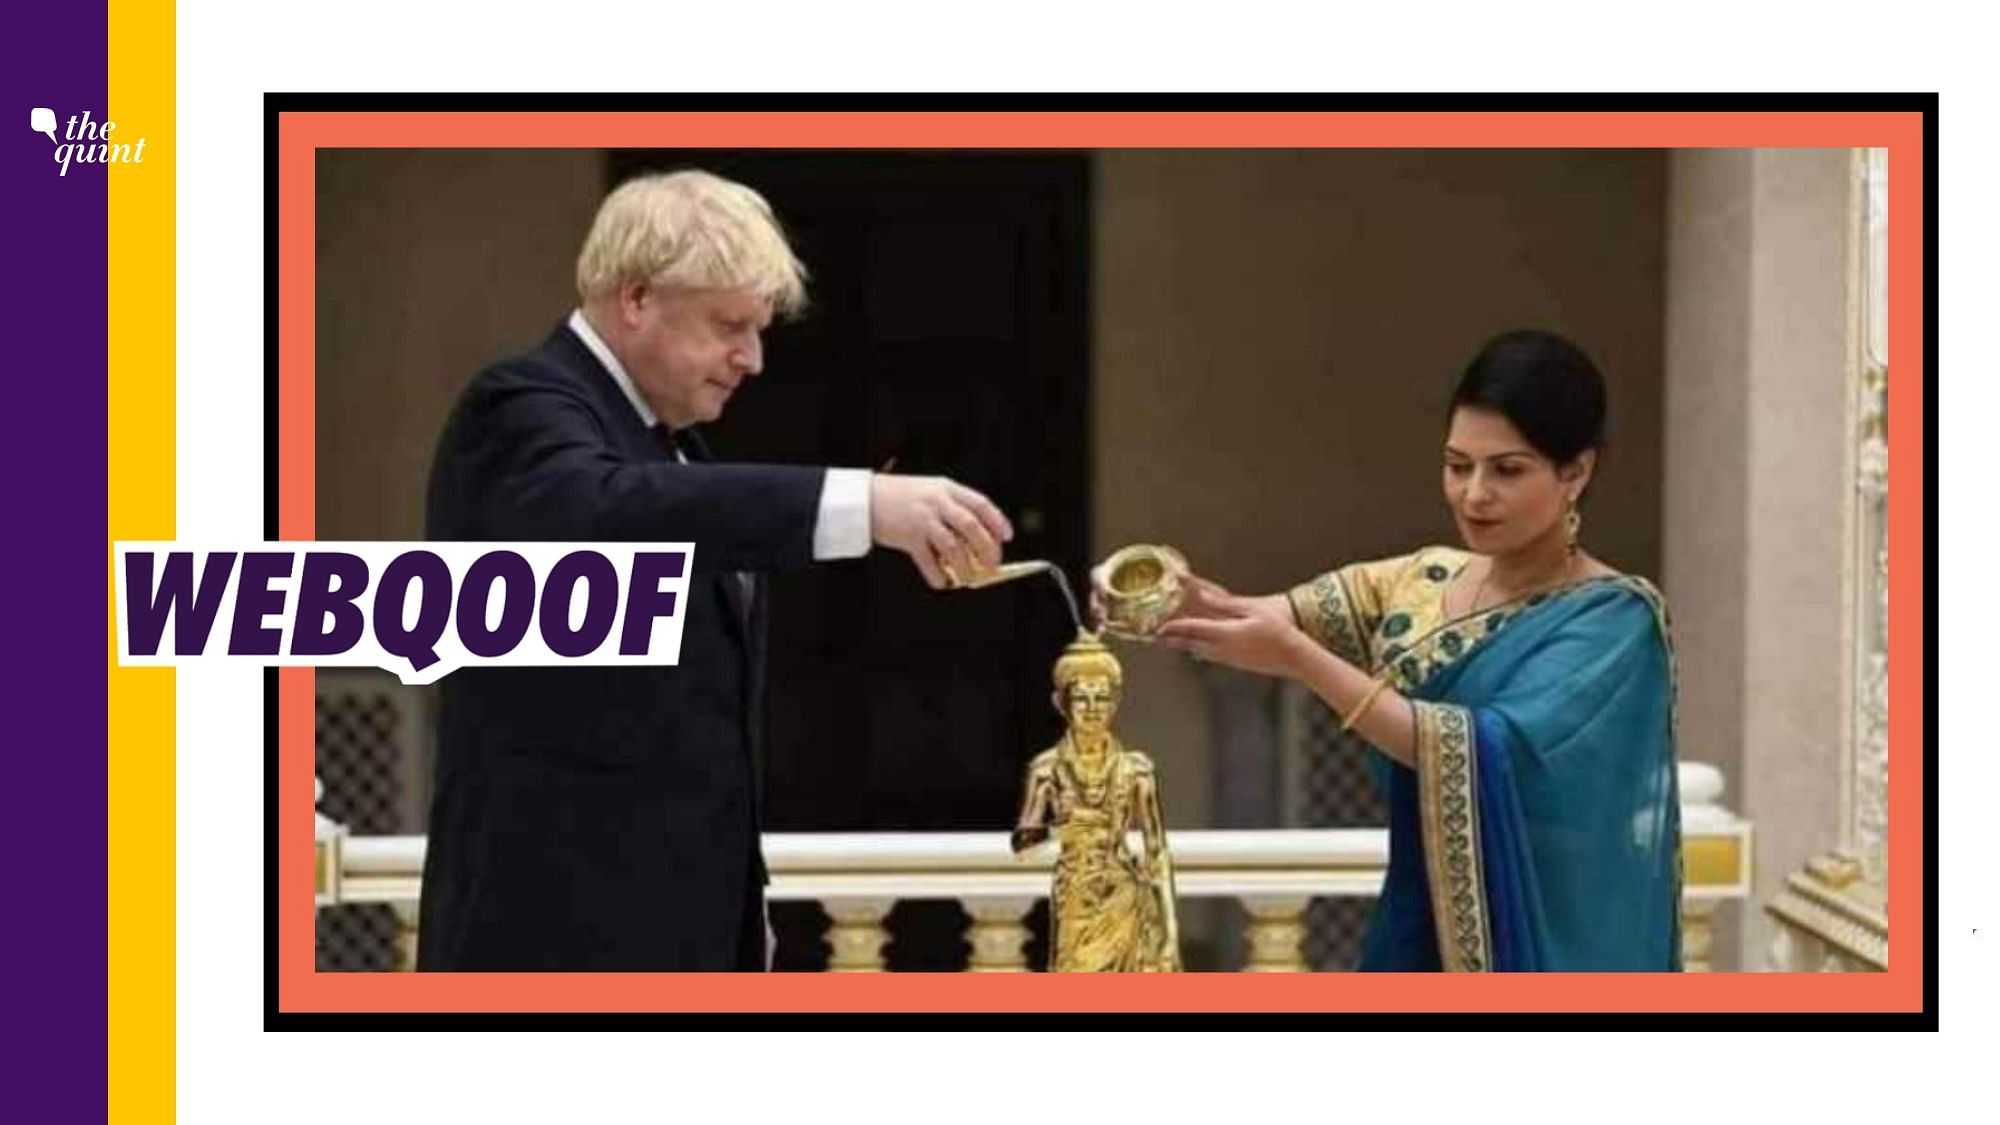 An old image of UK Prime Minister visiting a Hindu temple in London is being shared with a false claim that he performed “Ram abhishek” on 5 August.